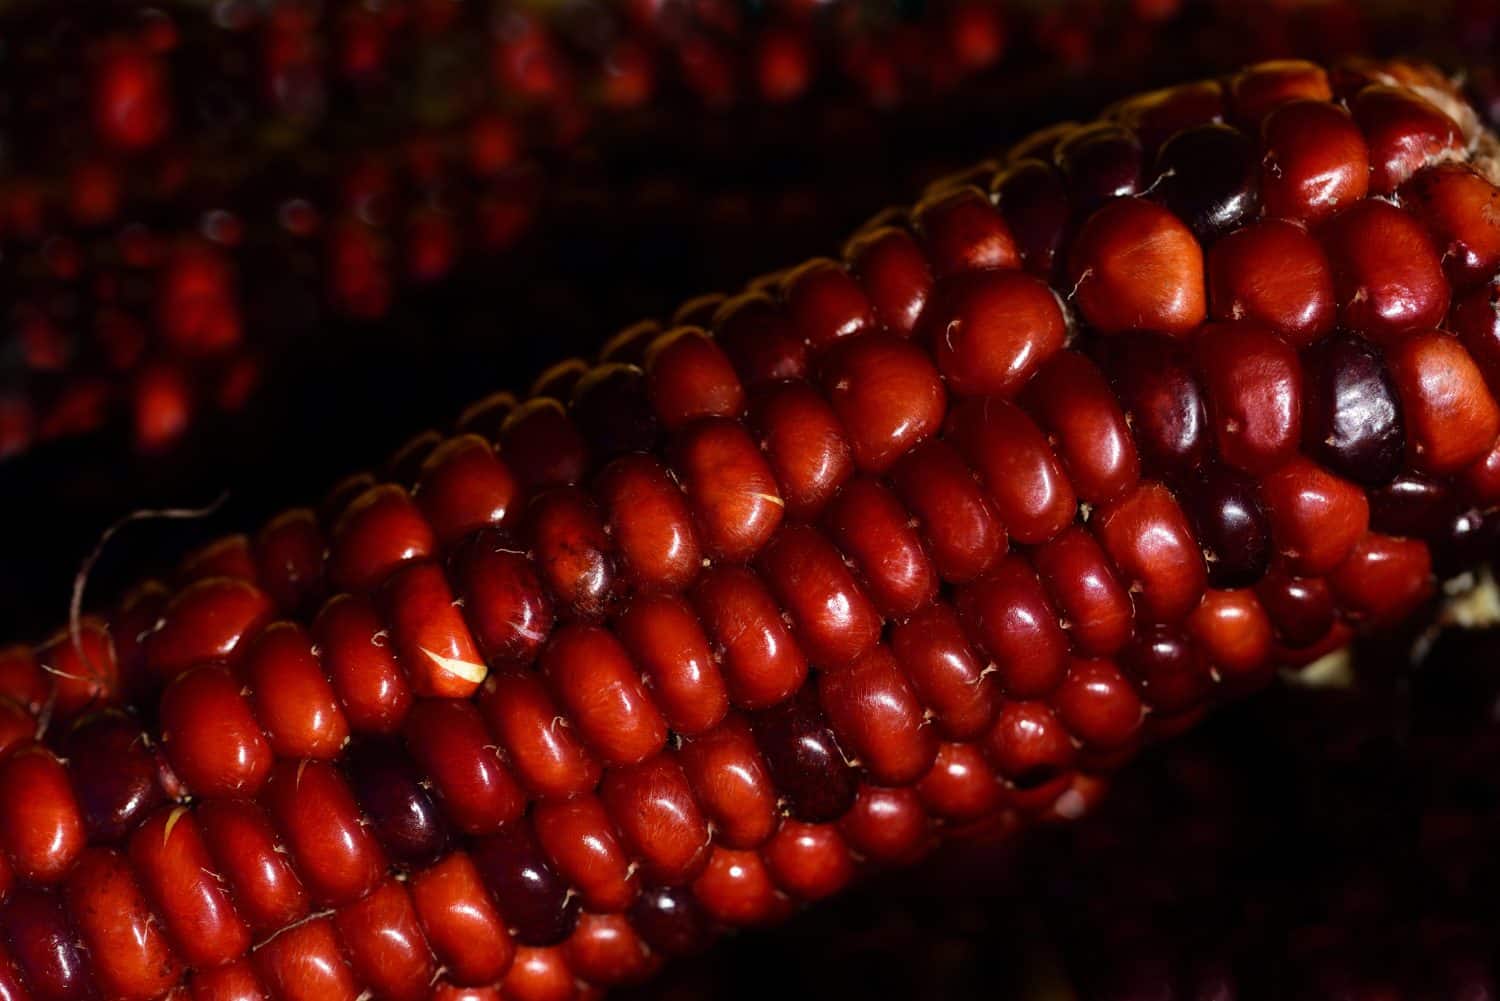 One flour corn variety is the Apache Red.